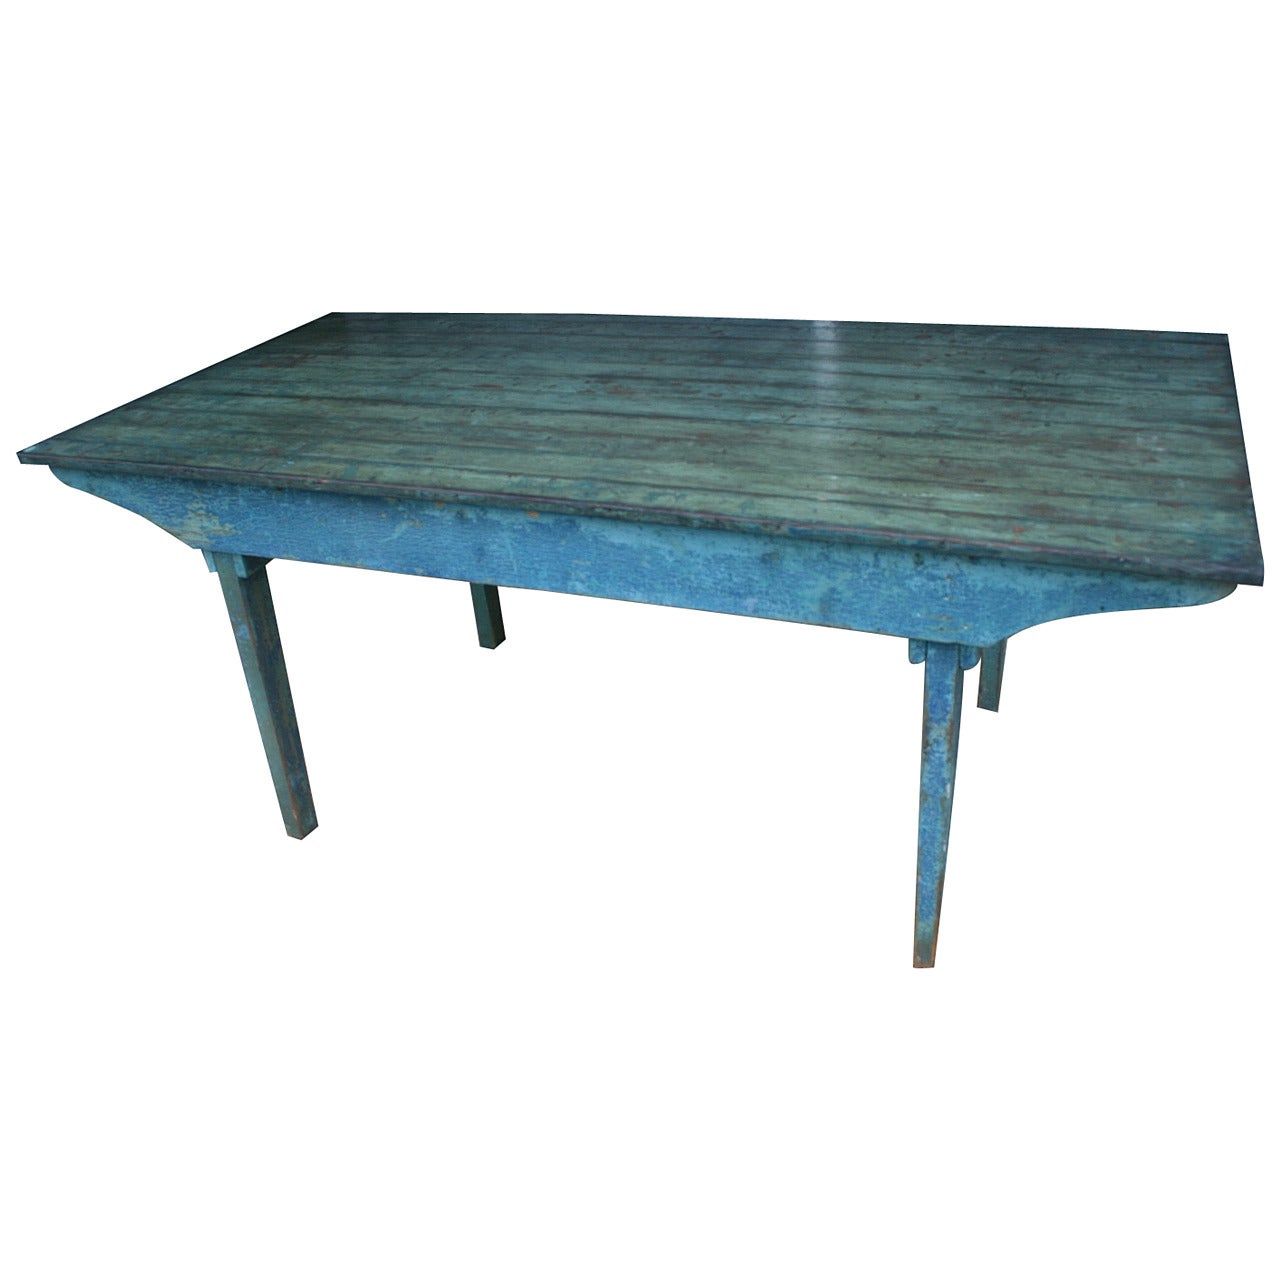 Early 20th Century Blue Painted Dining Table